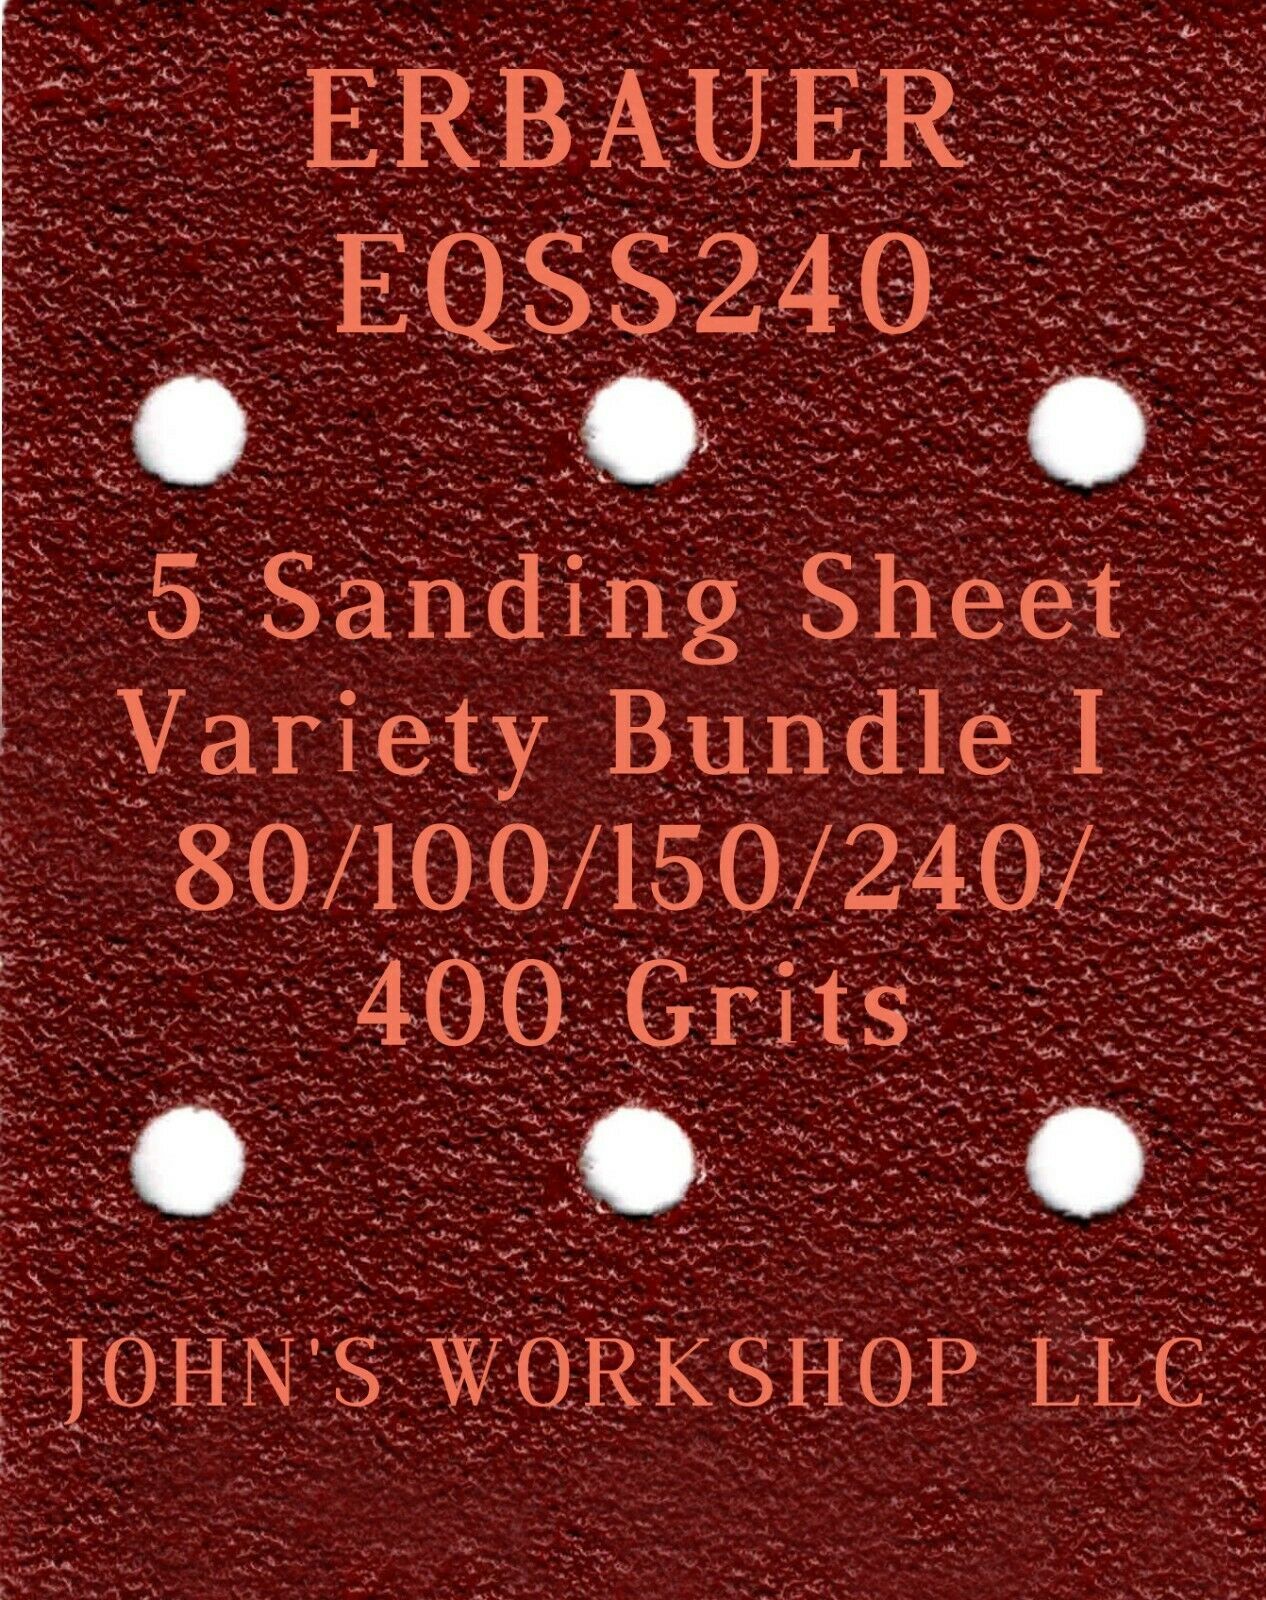 Primary image for ERBAUER EQSS240 - 80/100/150/240/400 Grits - 5 Sandpaper Variety Bundle I